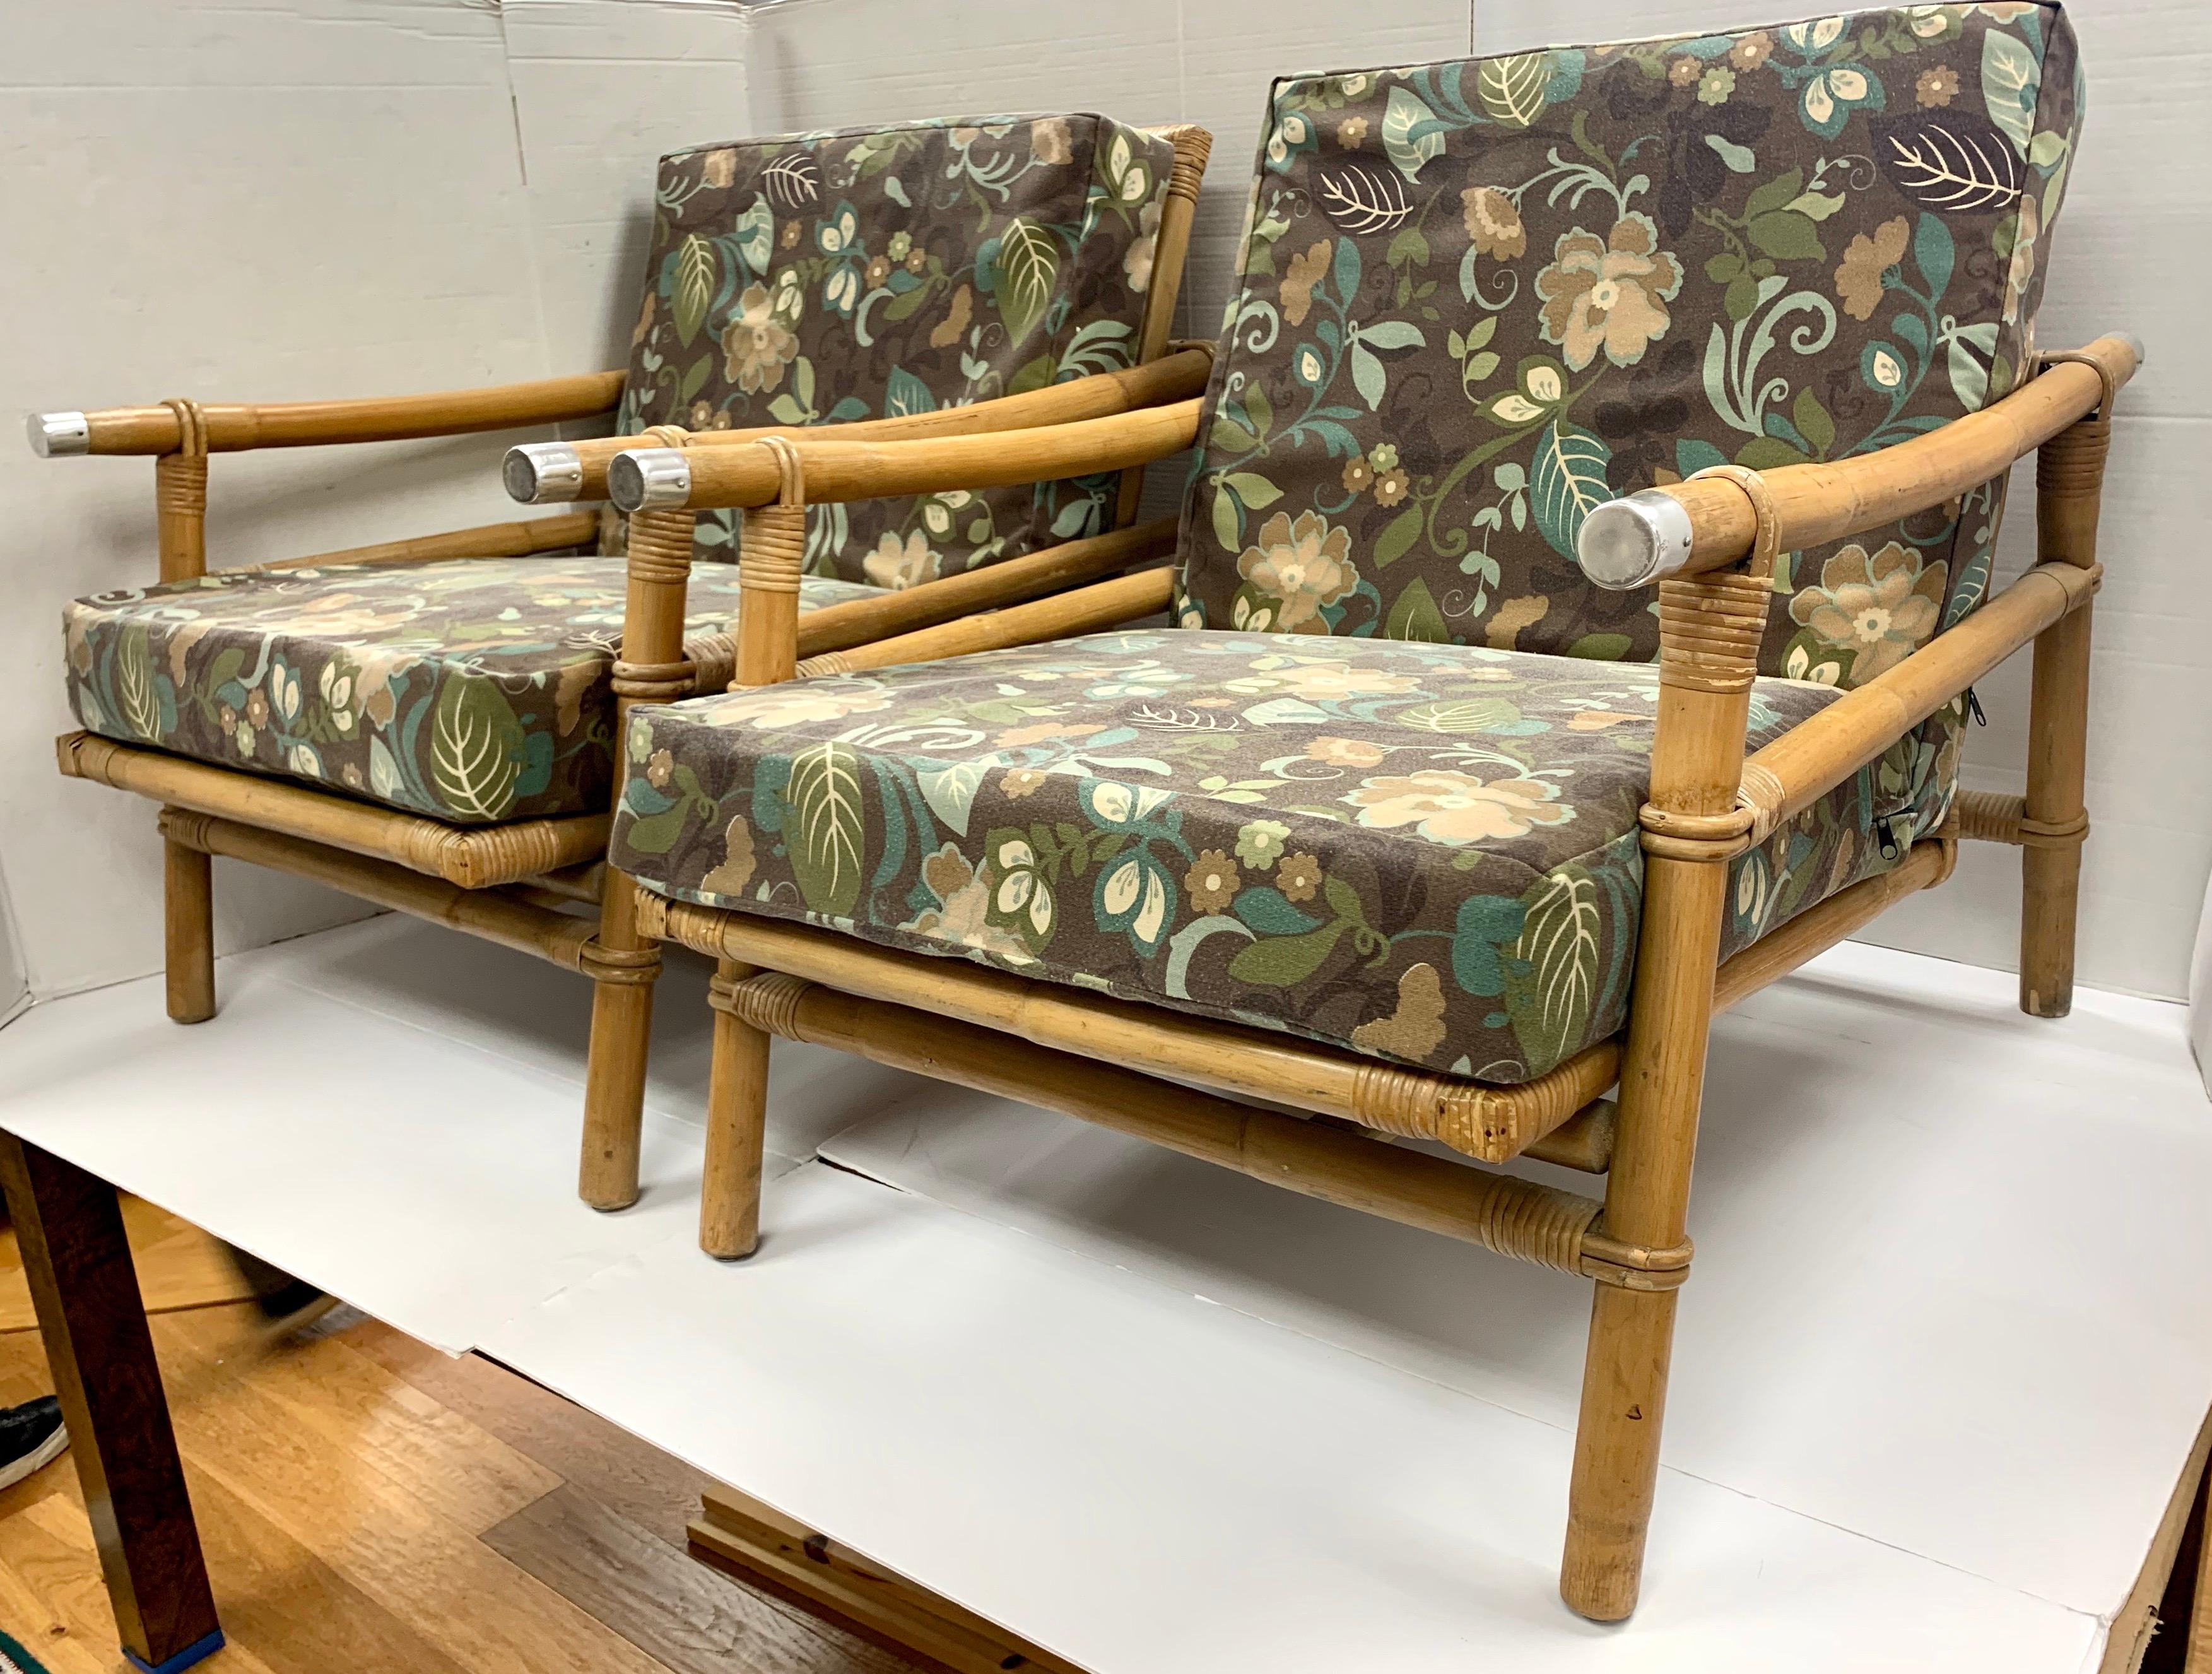 An coveted pair of vintage Campaign style lounge chairs made by Ficks Reed and designed by John Wisner, circa 1954. Stout rattan and bamboo frame with a beautiful raffia seat back. Handsome solid metal accents mark the arms. Fabulous design, quality